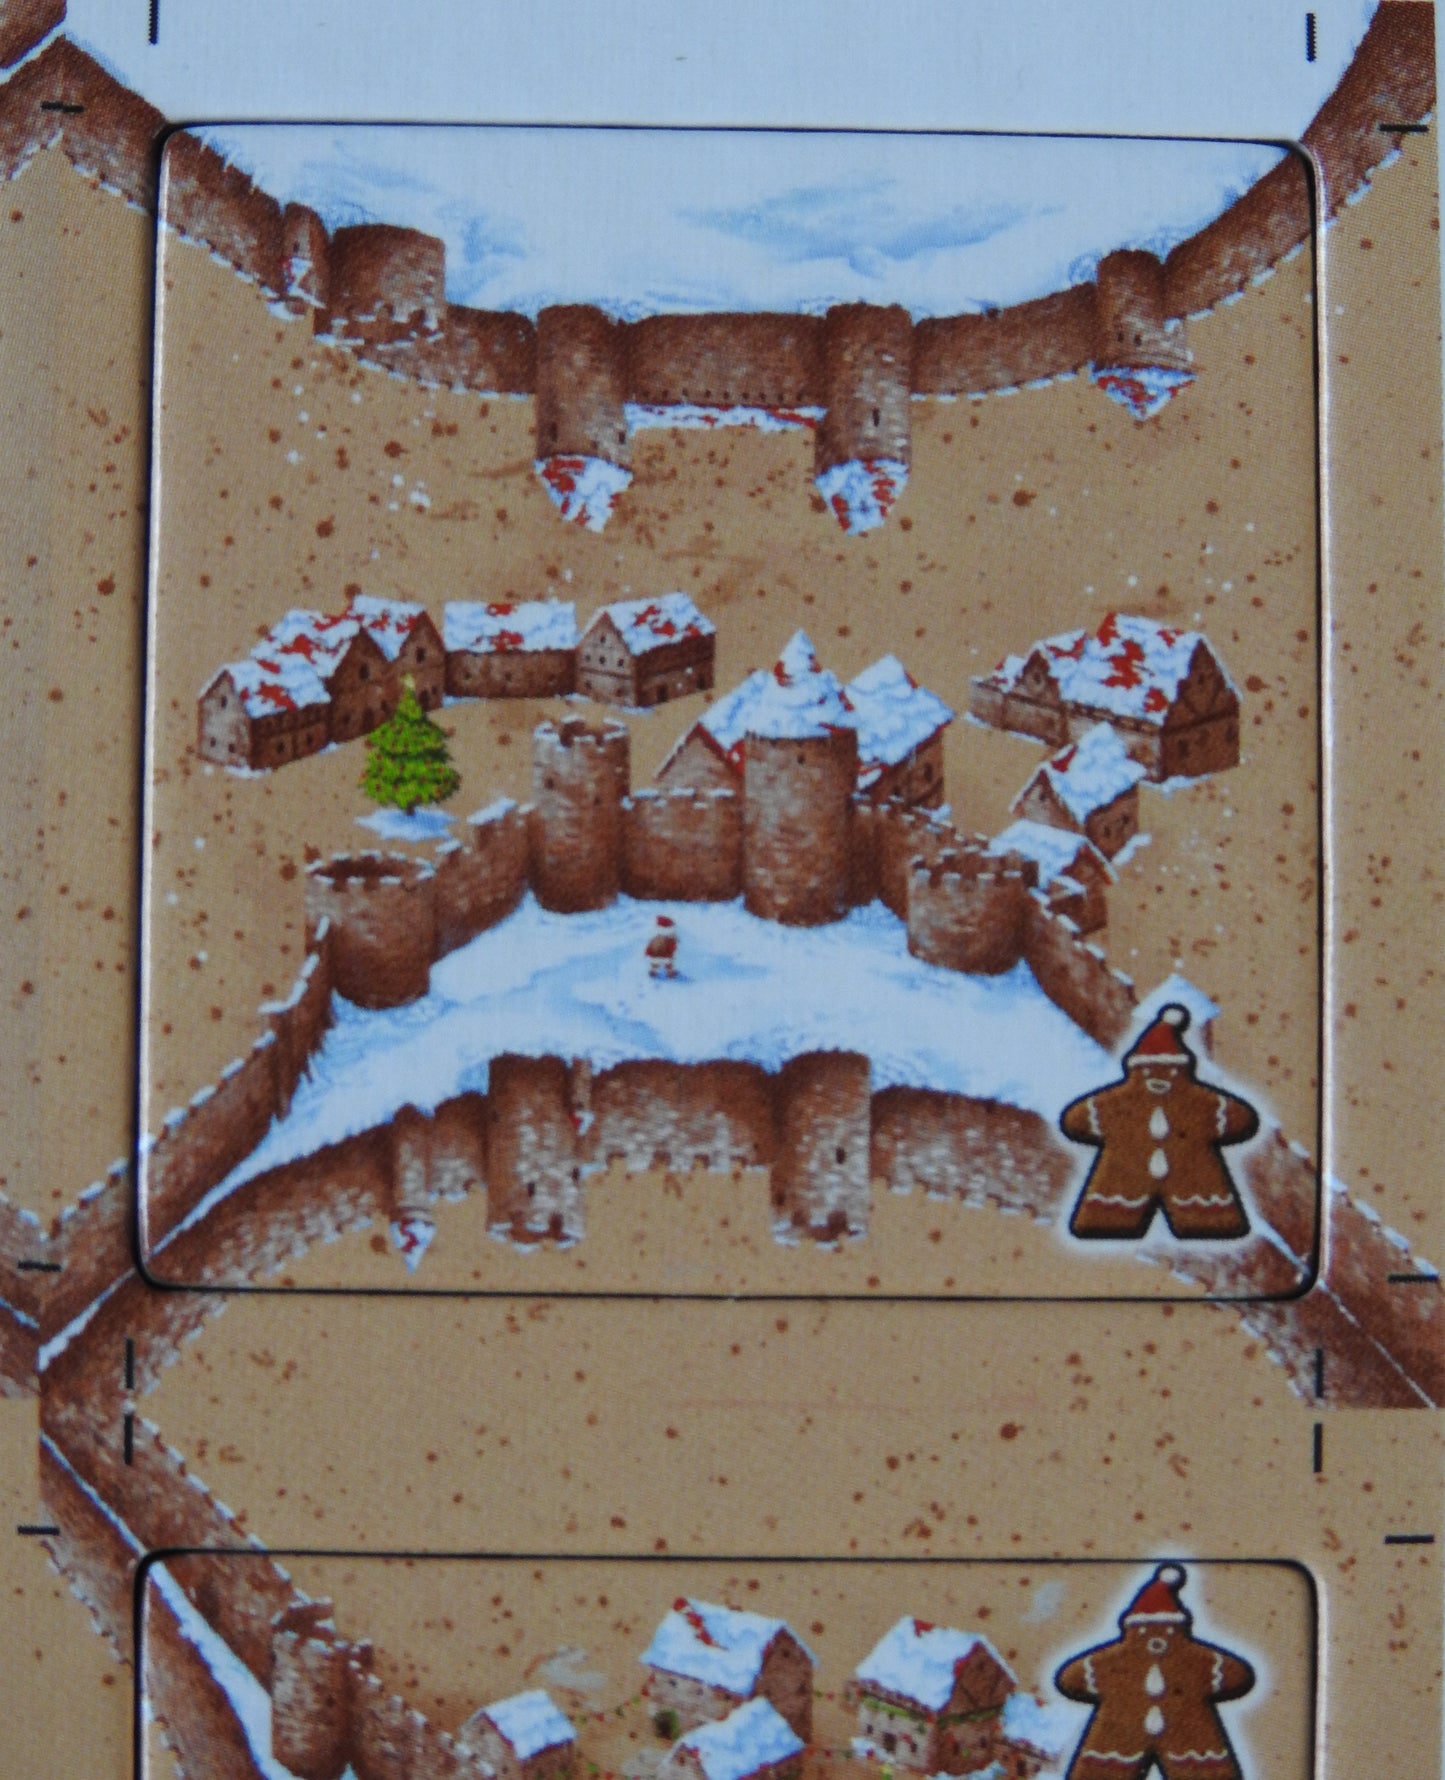 Final close-up view of one of the included winter tiles, with buildings inside the city.